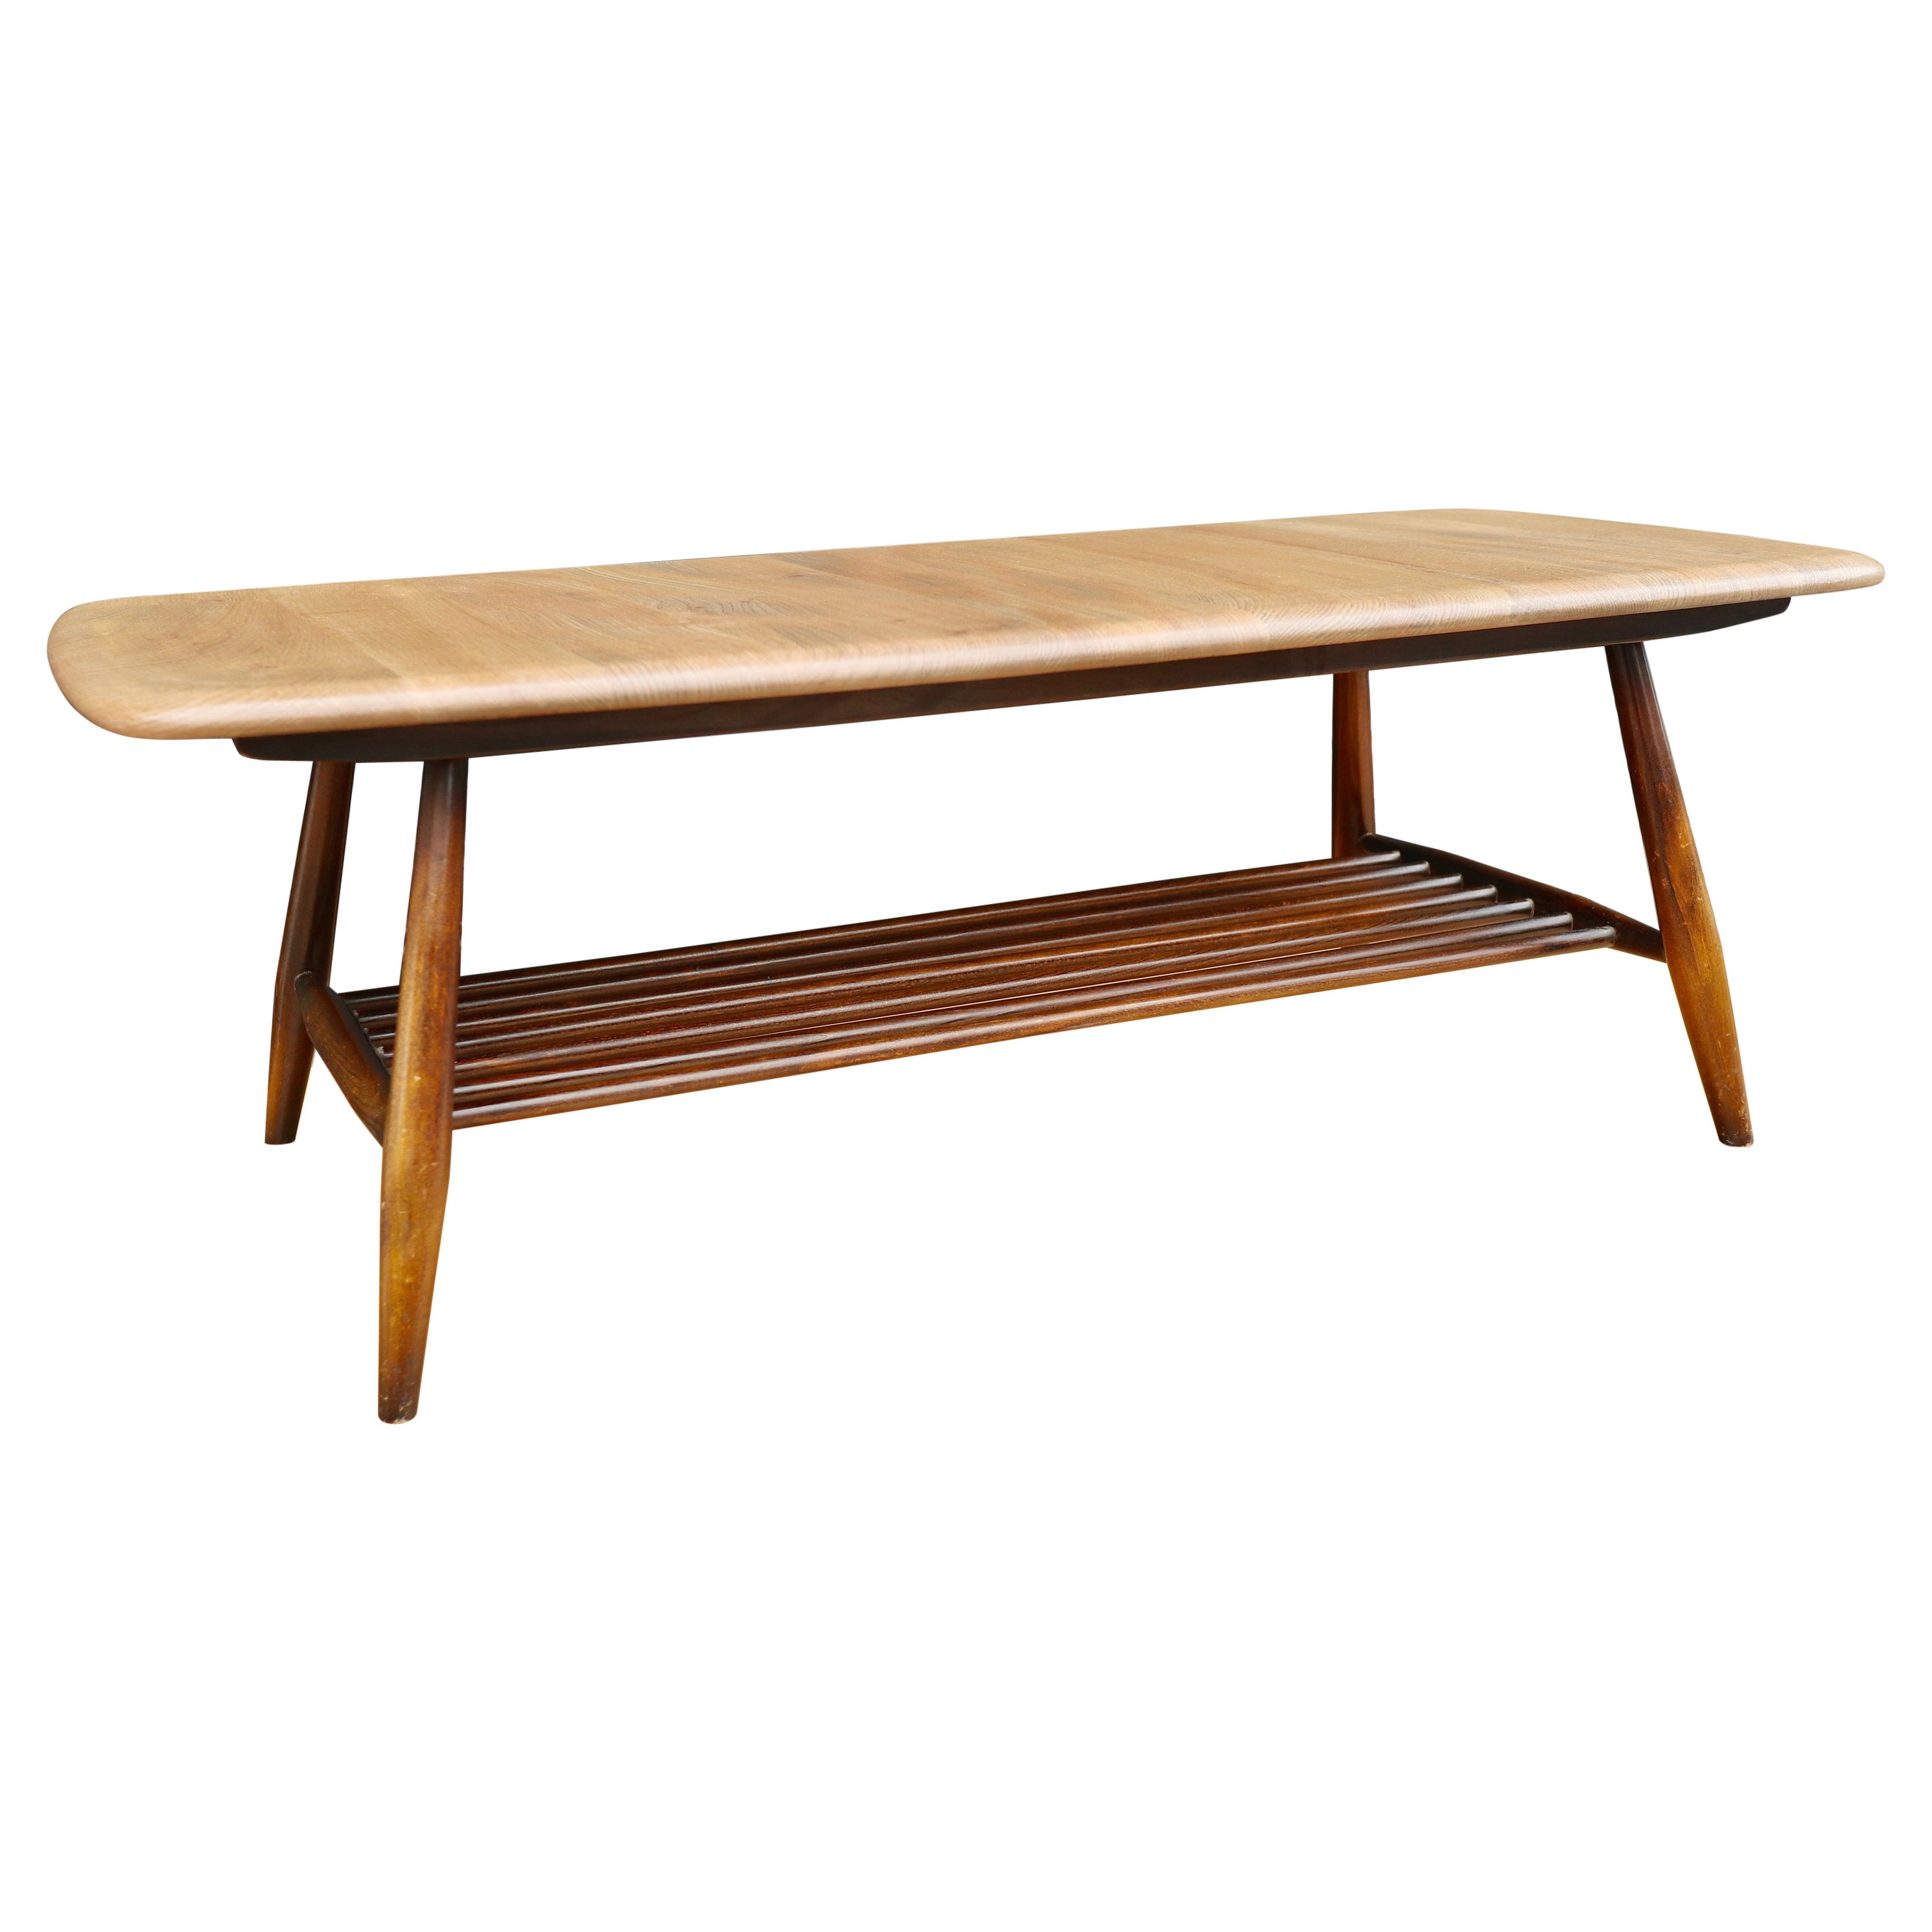 What wood is Ercol furniture made from?